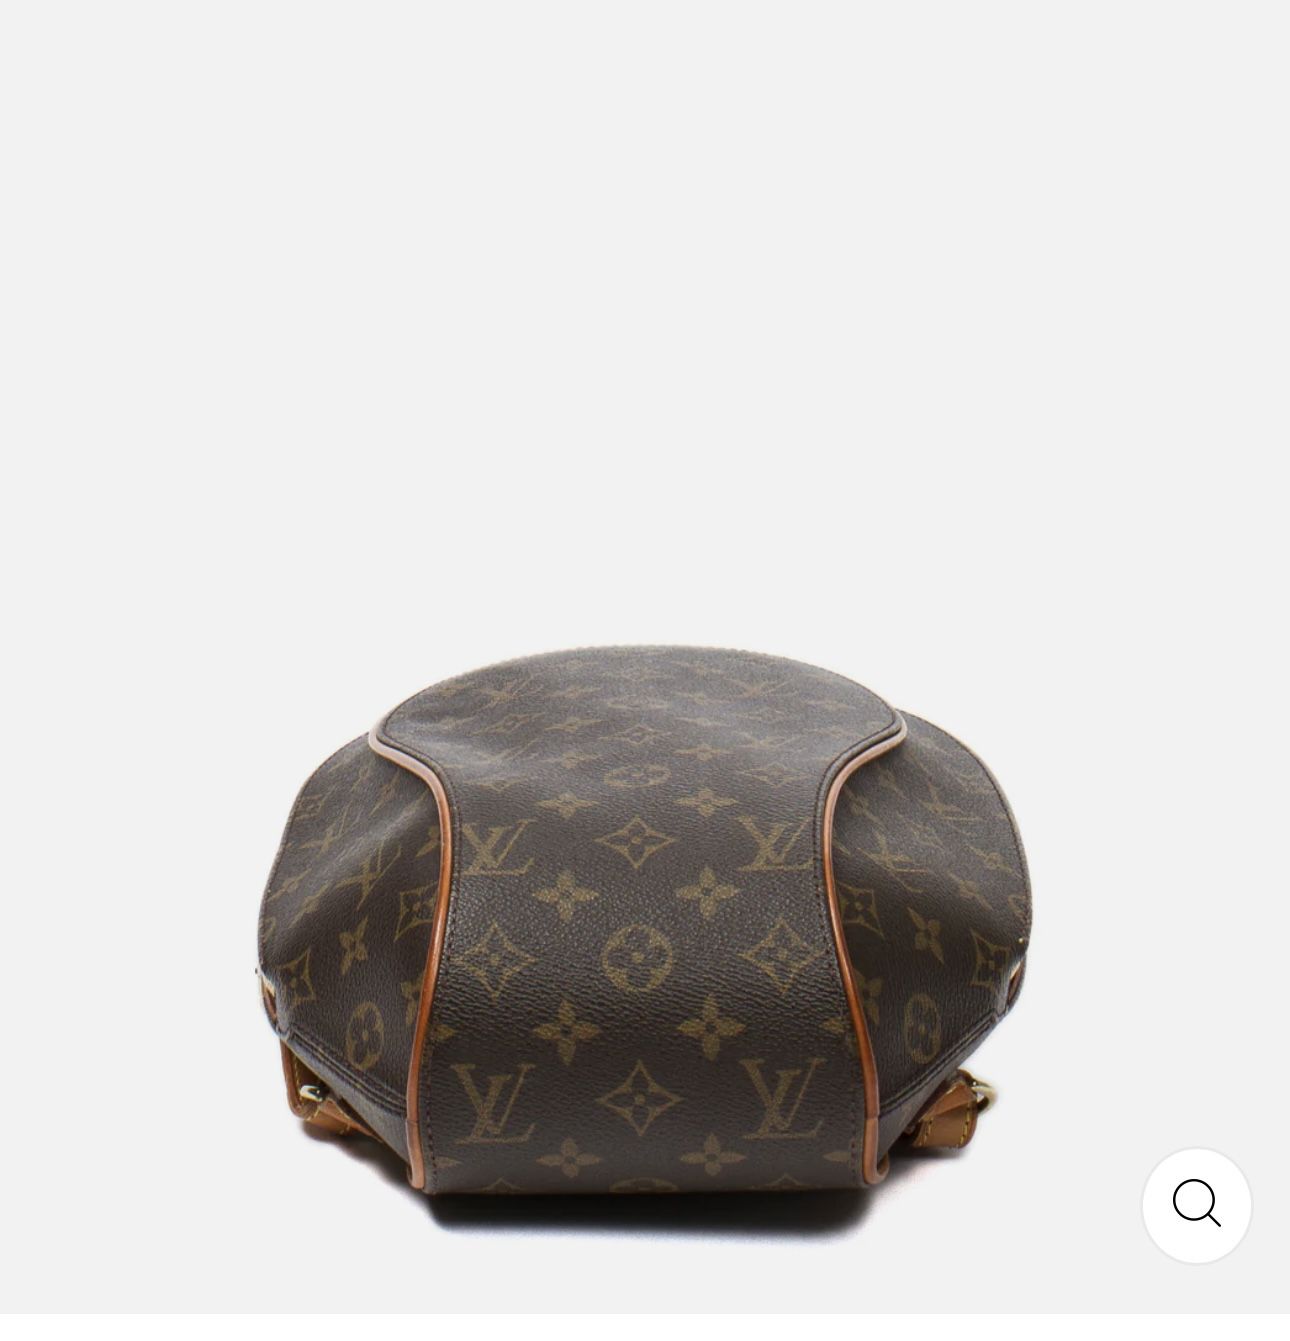 New And Used Louis Vuitton For Sale In Pomona, Ca